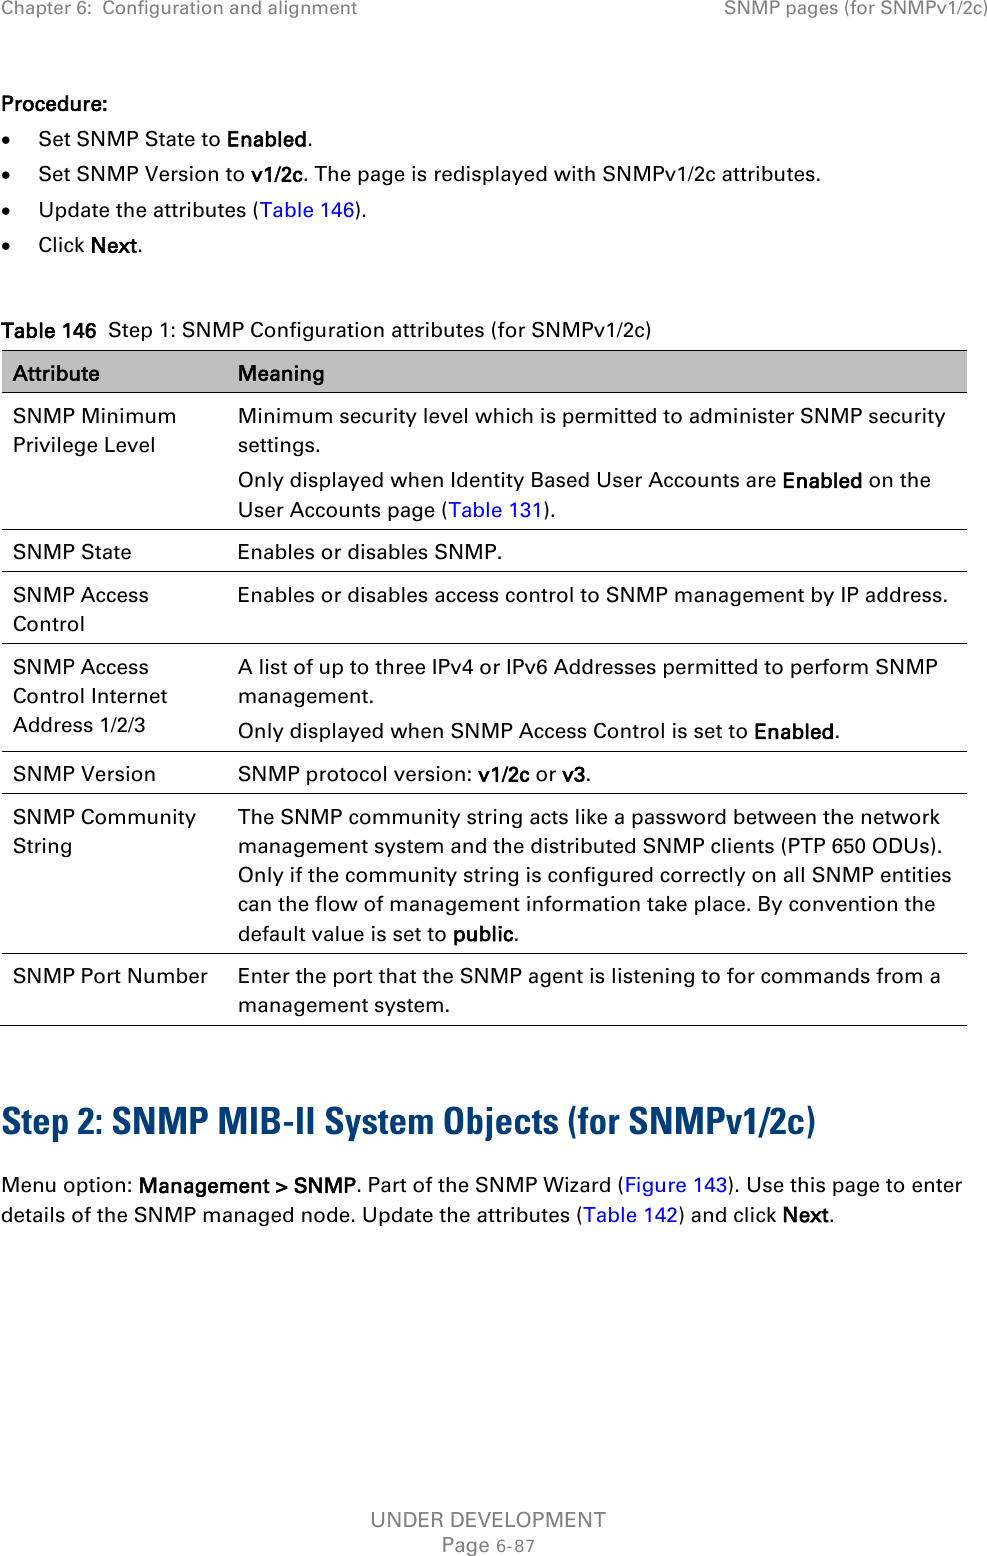 Chapter 6:  Configuration and alignment SNMP pages (for SNMPv1/2c)  Procedure: • Set SNMP State to Enabled. • Set SNMP Version to v1/2c. The page is redisplayed with SNMPv1/2c attributes. • Update the attributes (Table 146). • Click Next.  Table 146  Step 1: SNMP Configuration attributes (for SNMPv1/2c) Attribute Meaning SNMP Minimum Privilege Level Minimum security level which is permitted to administer SNMP security settings. Only displayed when Identity Based User Accounts are Enabled on the User Accounts page (Table 131). SNMP State Enables or disables SNMP. SNMP Access Control Enables or disables access control to SNMP management by IP address. SNMP Access Control Internet Address 1/2/3 A list of up to three IPv4 or IPv6 Addresses permitted to perform SNMP management. Only displayed when SNMP Access Control is set to Enabled. SNMP Version SNMP protocol version: v1/2c or v3. SNMP Community String The SNMP community string acts like a password between the network management system and the distributed SNMP clients (PTP 650 ODUs). Only if the community string is configured correctly on all SNMP entities can the flow of management information take place. By convention the default value is set to public. SNMP Port Number Enter the port that the SNMP agent is listening to for commands from a management system.  Step 2: SNMP MIB-II System Objects (for SNMPv1/2c) Menu option: Management &gt; SNMP. Part of the SNMP Wizard (Figure 143). Use this page to enter details of the SNMP managed node. Update the attributes (Table 142) and click Next.  UNDER DEVELOPMENT Page 6-87 